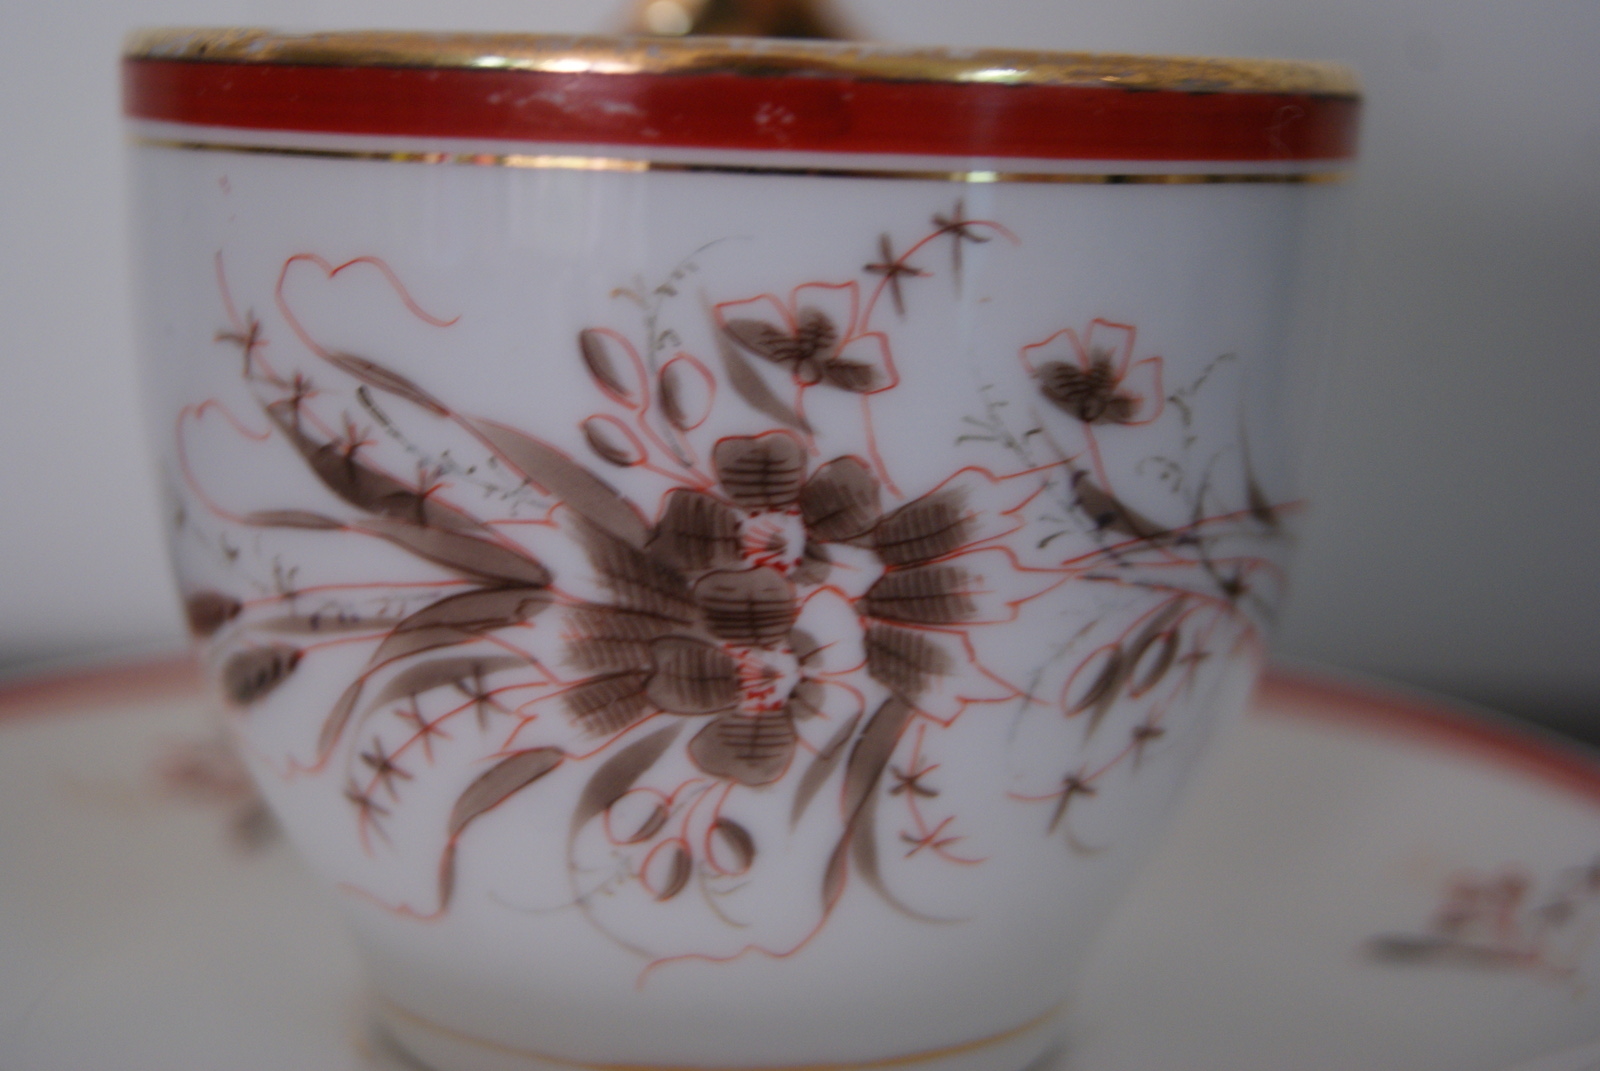 Waldenburg - Altwasser coffee cup with saucer with flowers and leaves